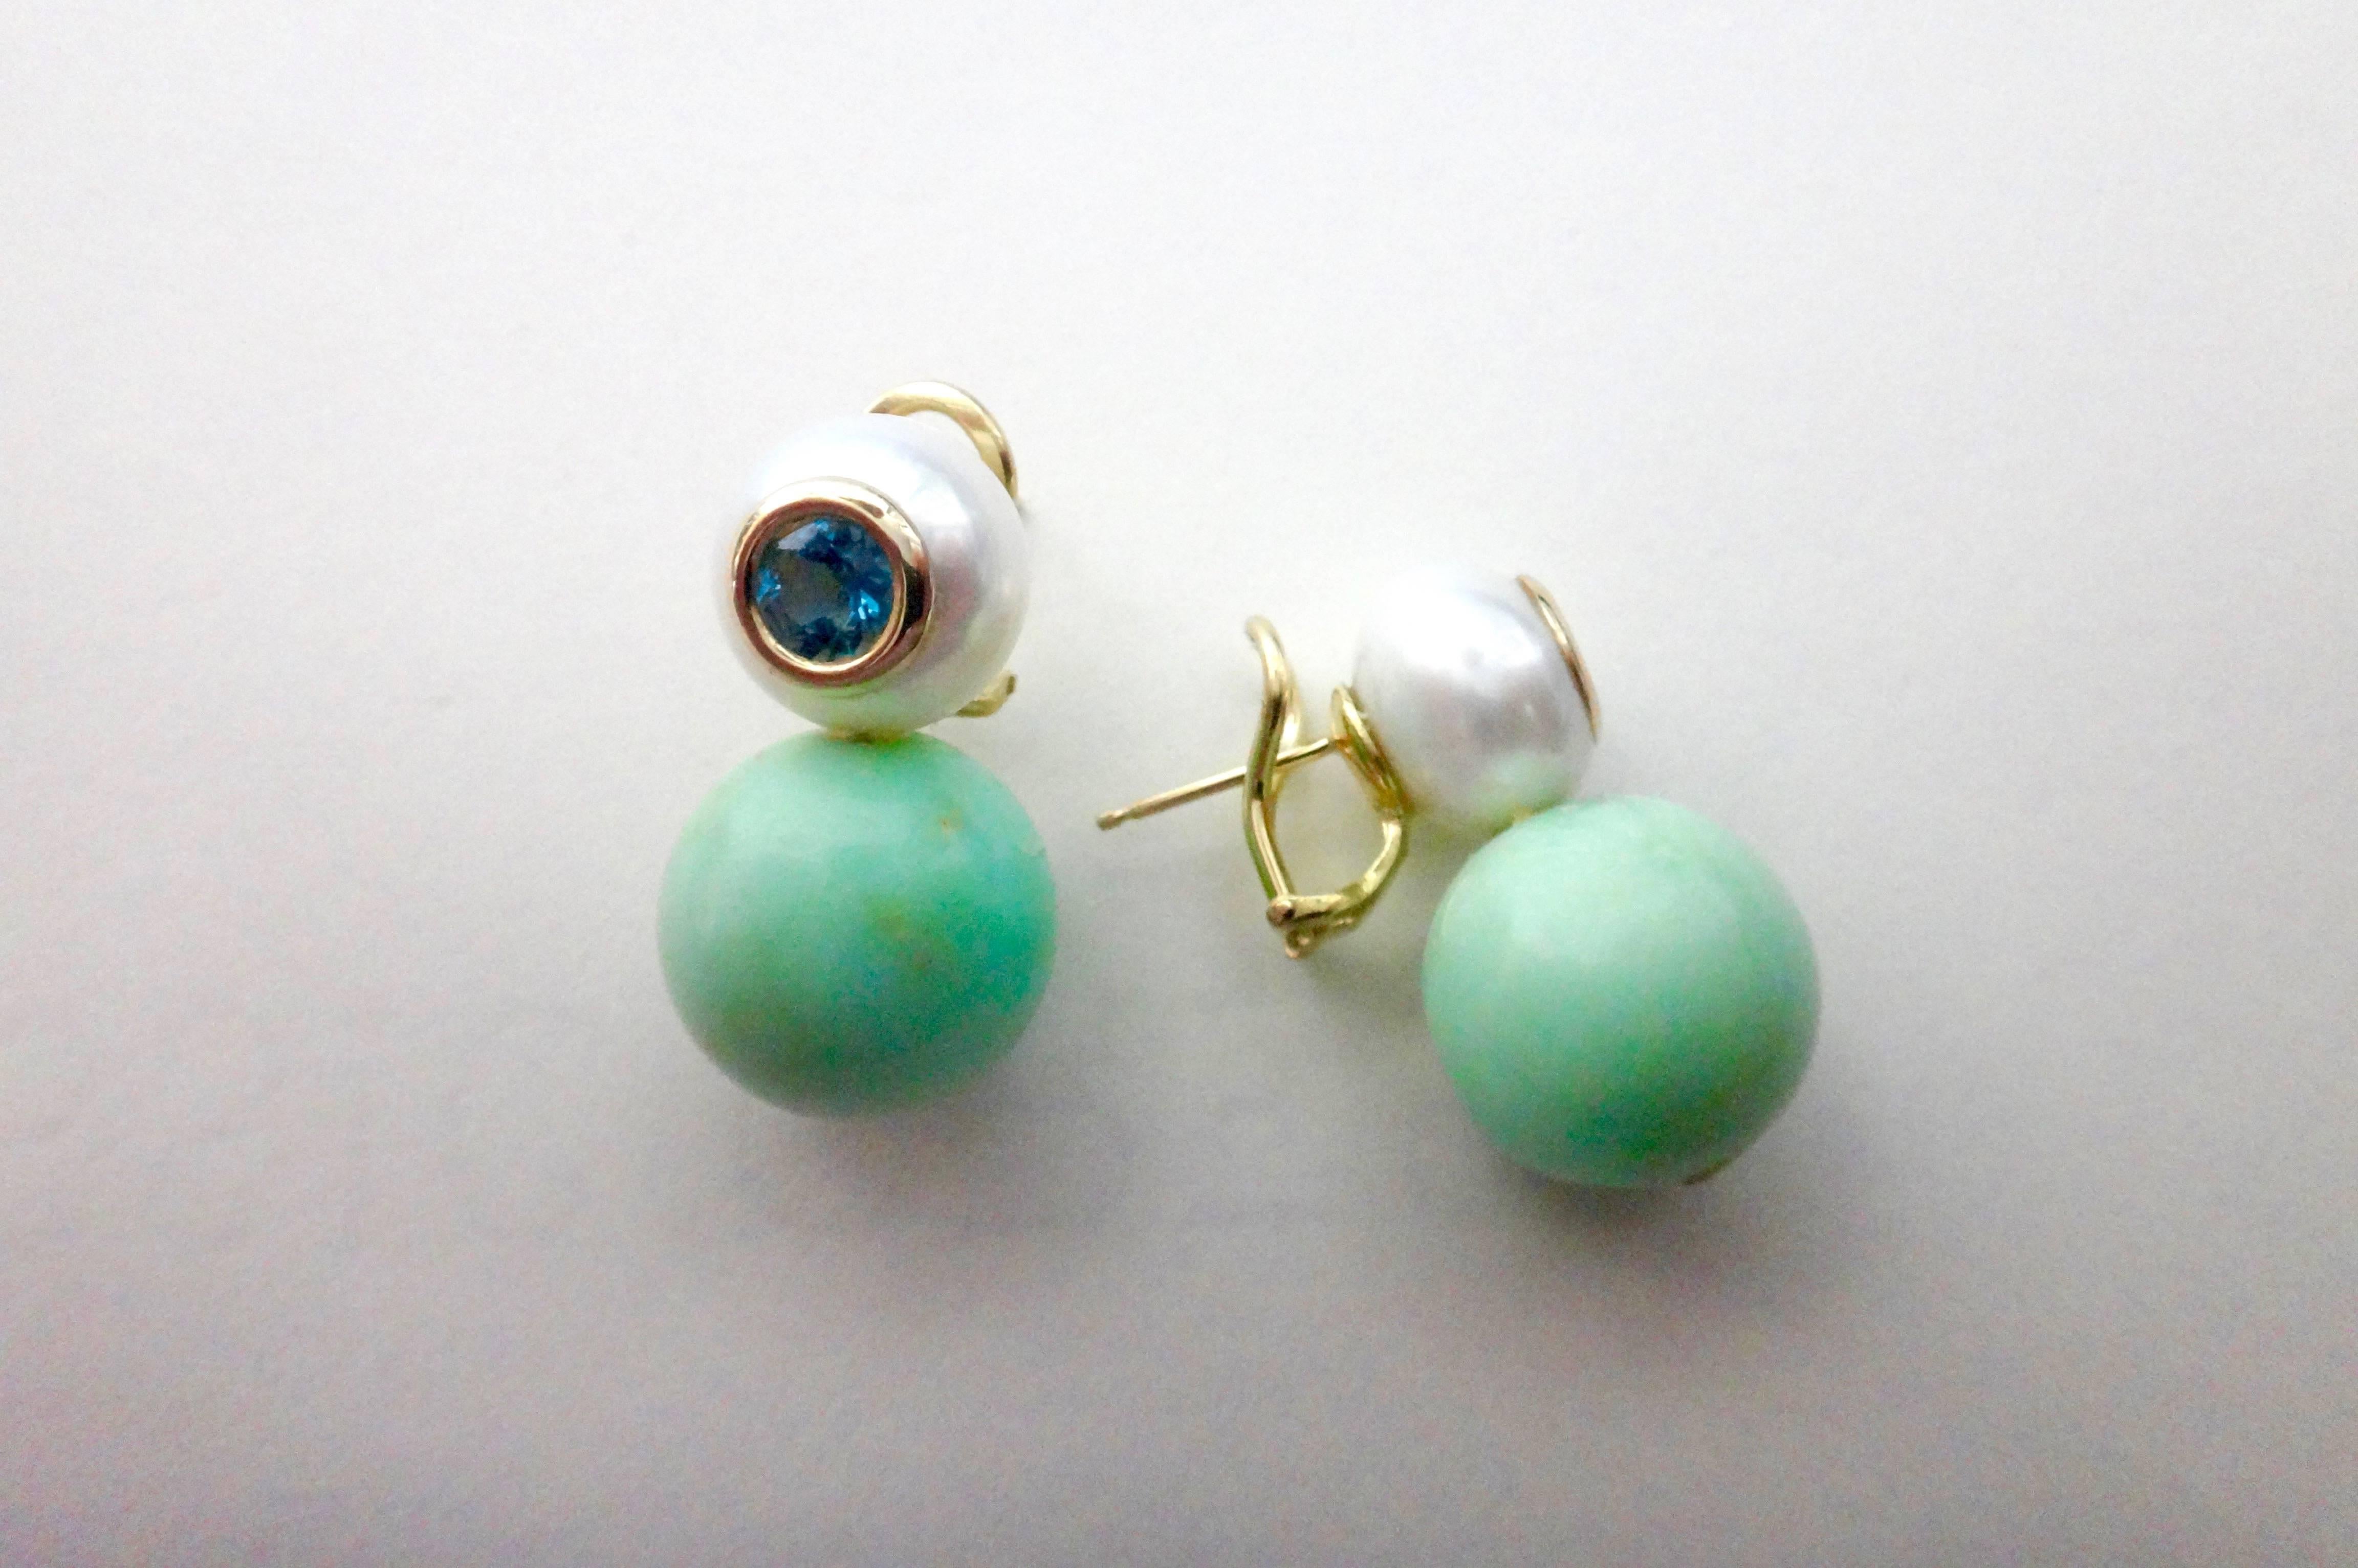 Chrysoprase spheres measuring 16mm are complimented with 13mm button shaped South Seas pearls drilled and bezel set with blue zircons.  Chrysoprase is a gemstone variety of chalcedony (a cryptocrystalline form of silica) that contains small